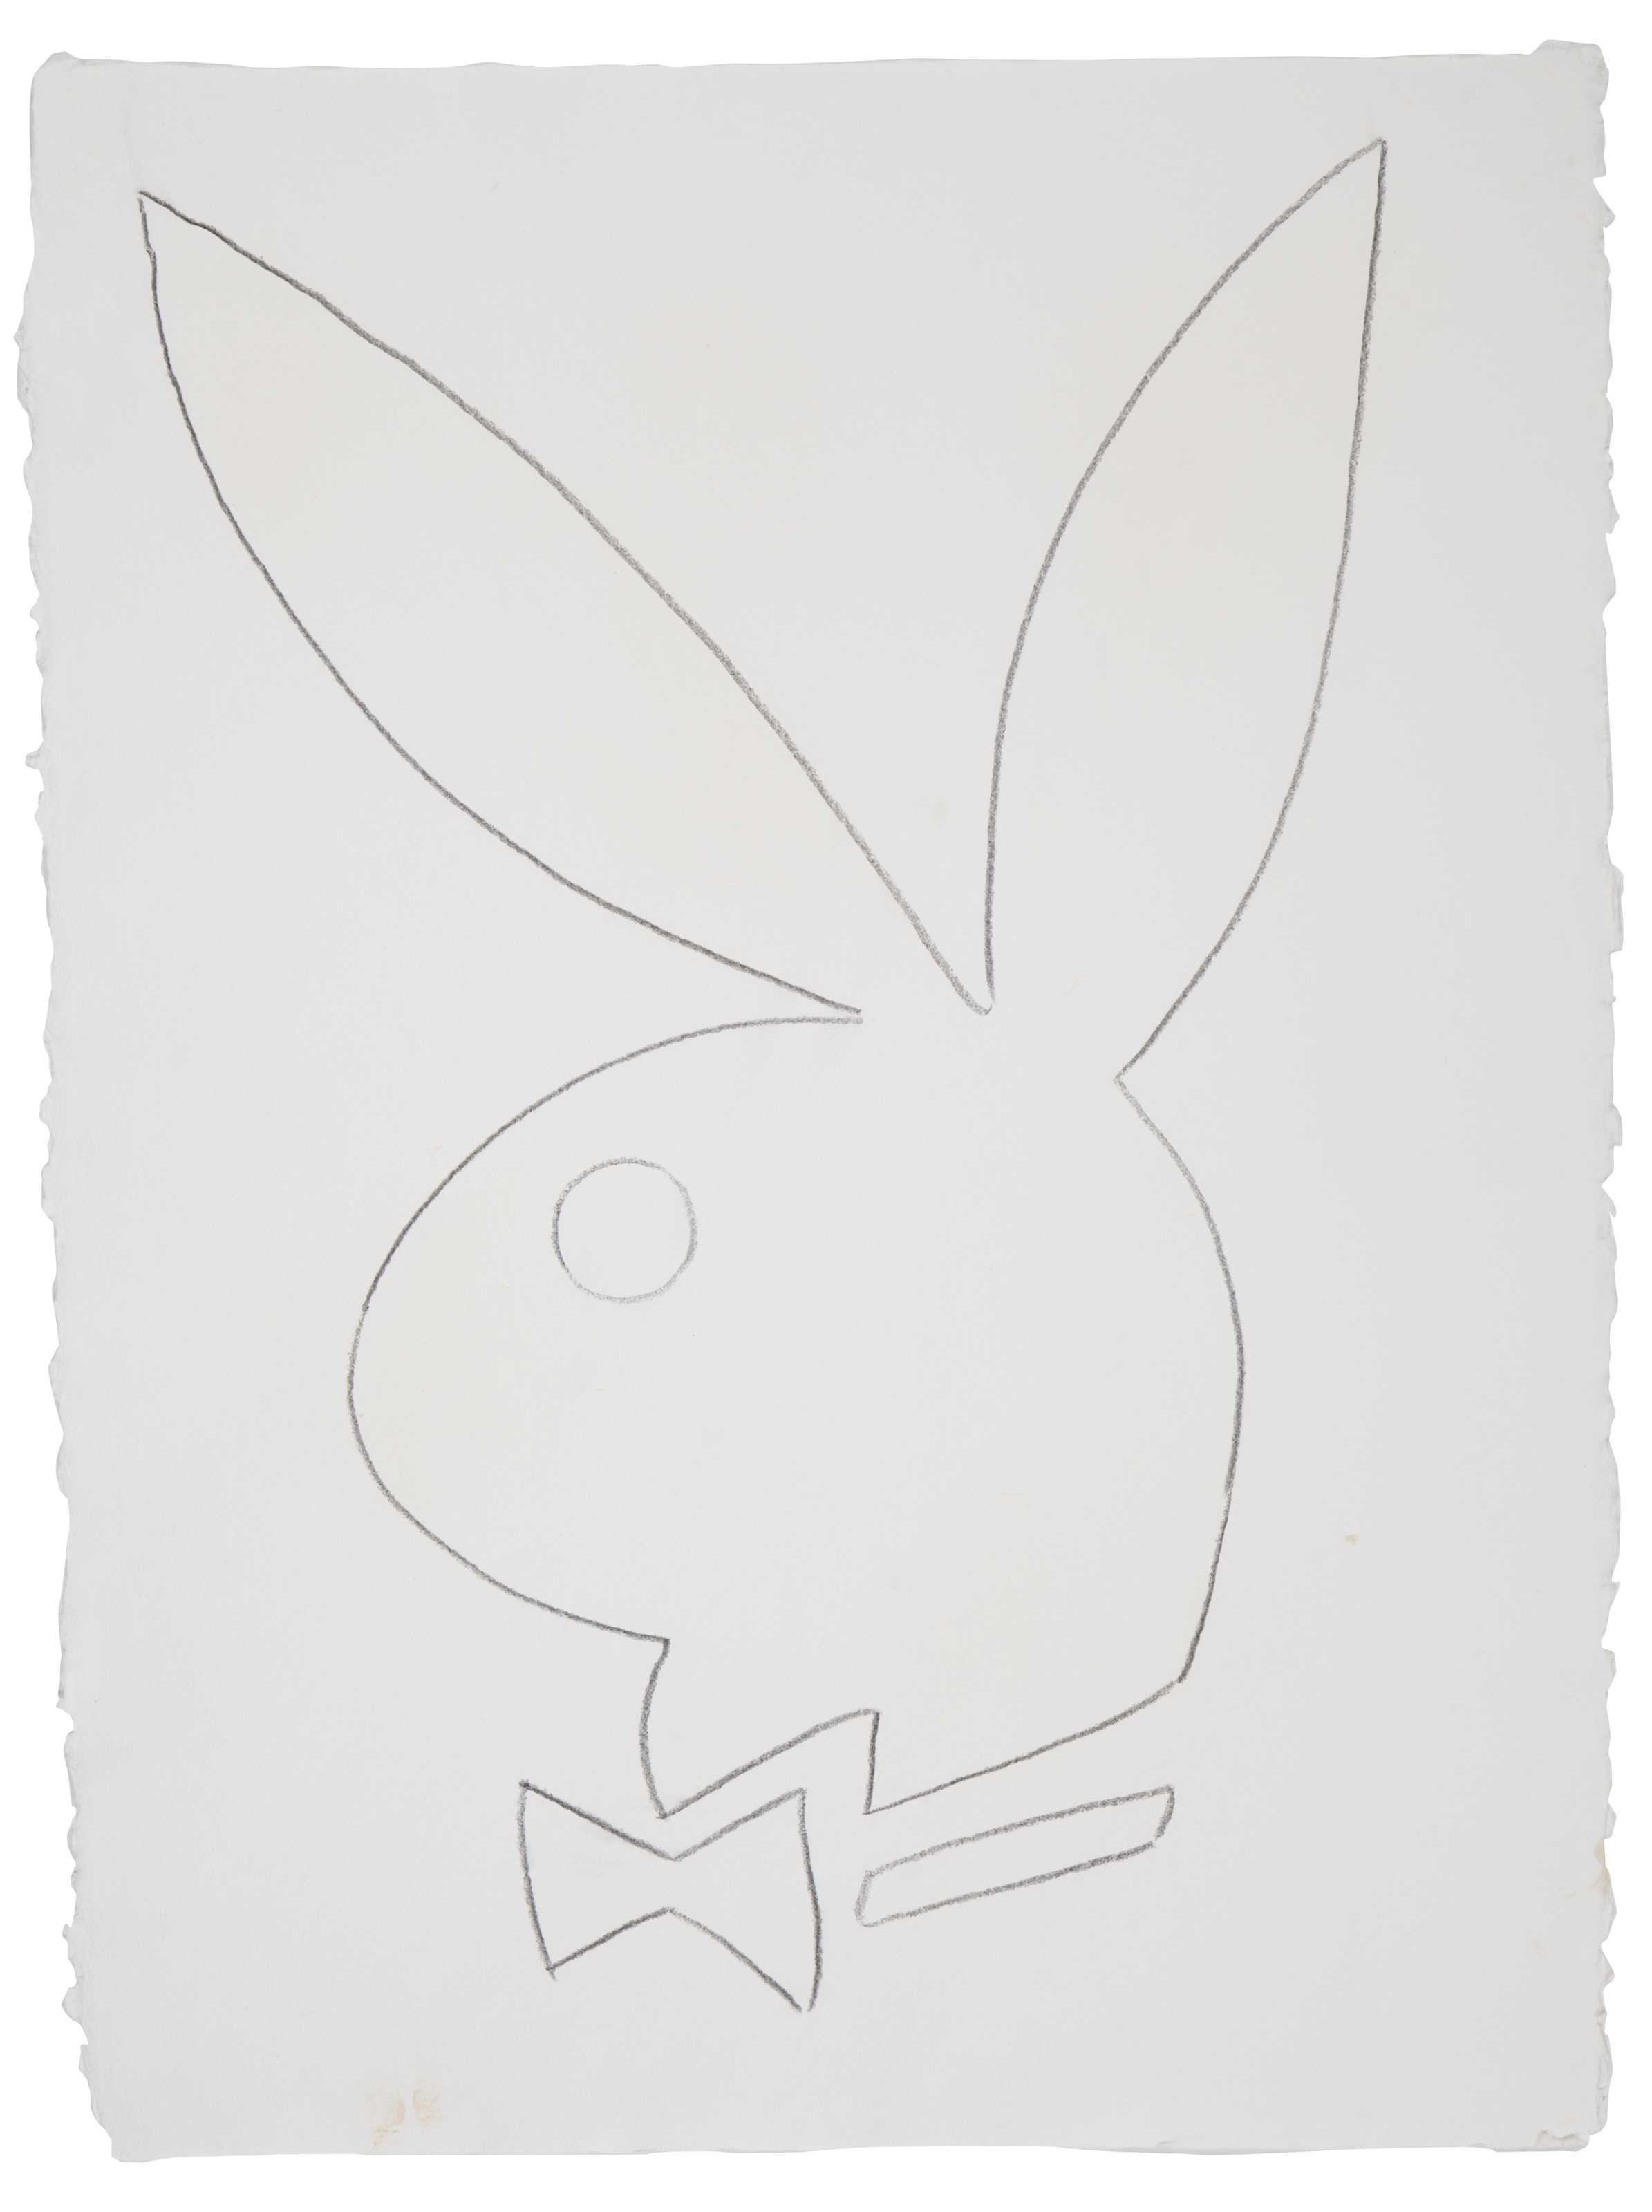 Playboy bunny paintings search result at